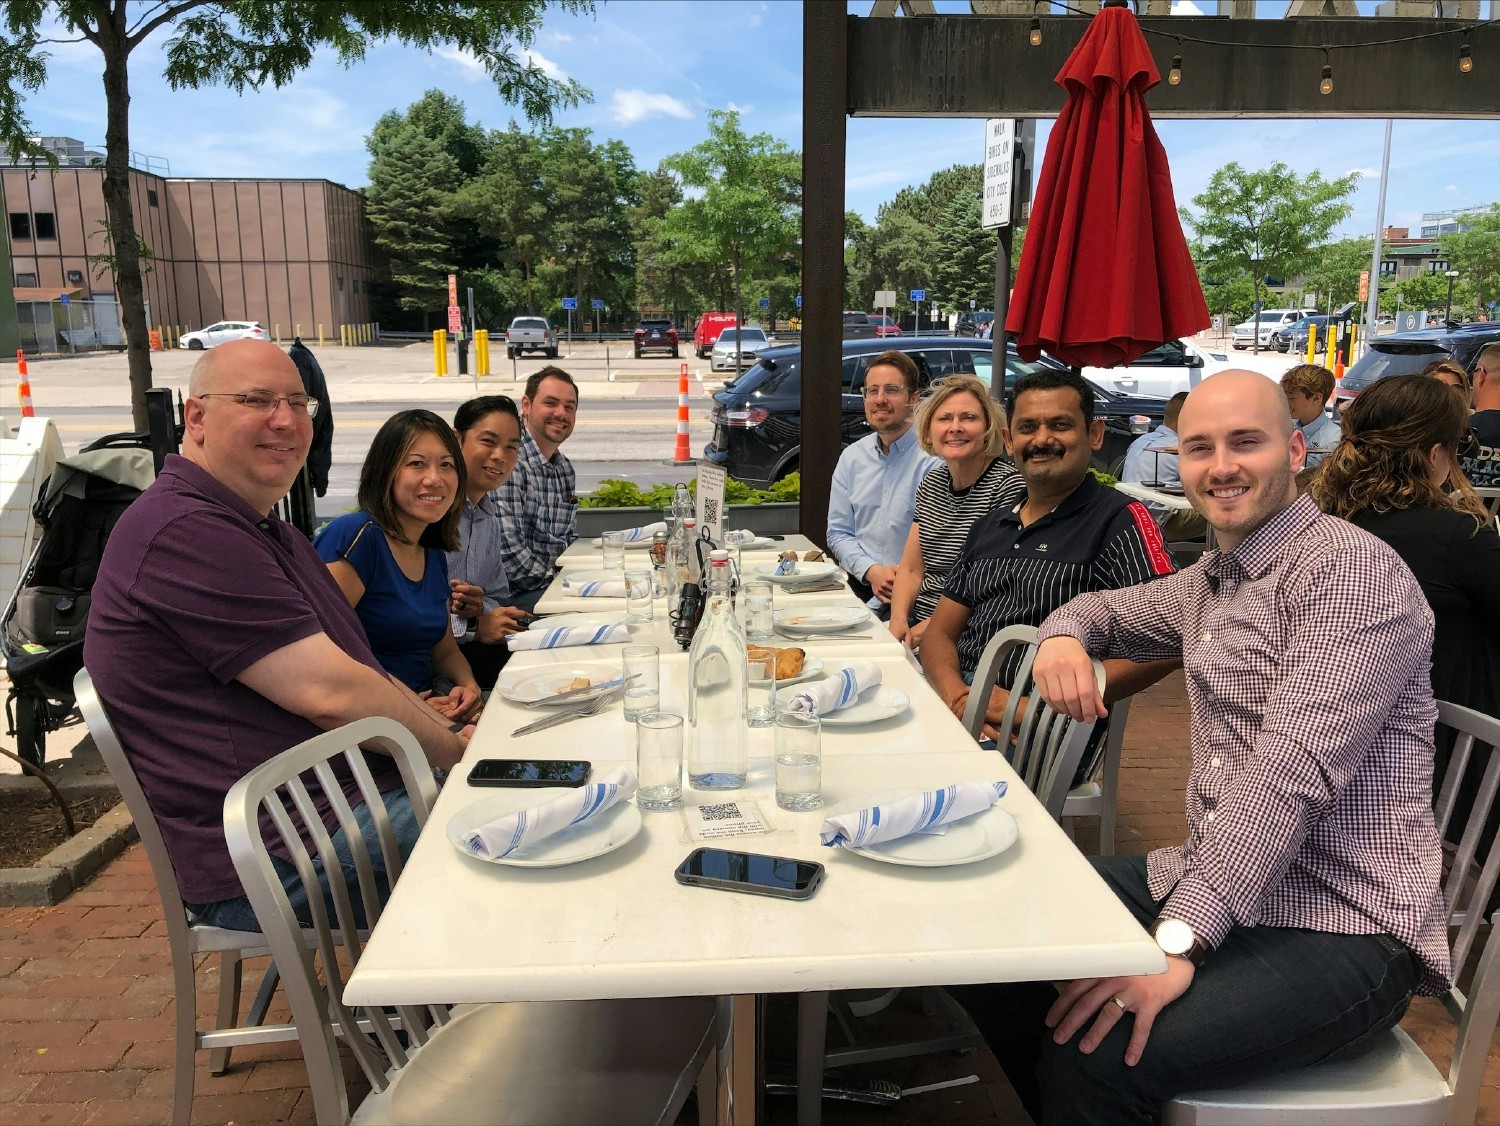 We love any opportunity to meet with our client-partners in person to catch up and grab dinner!